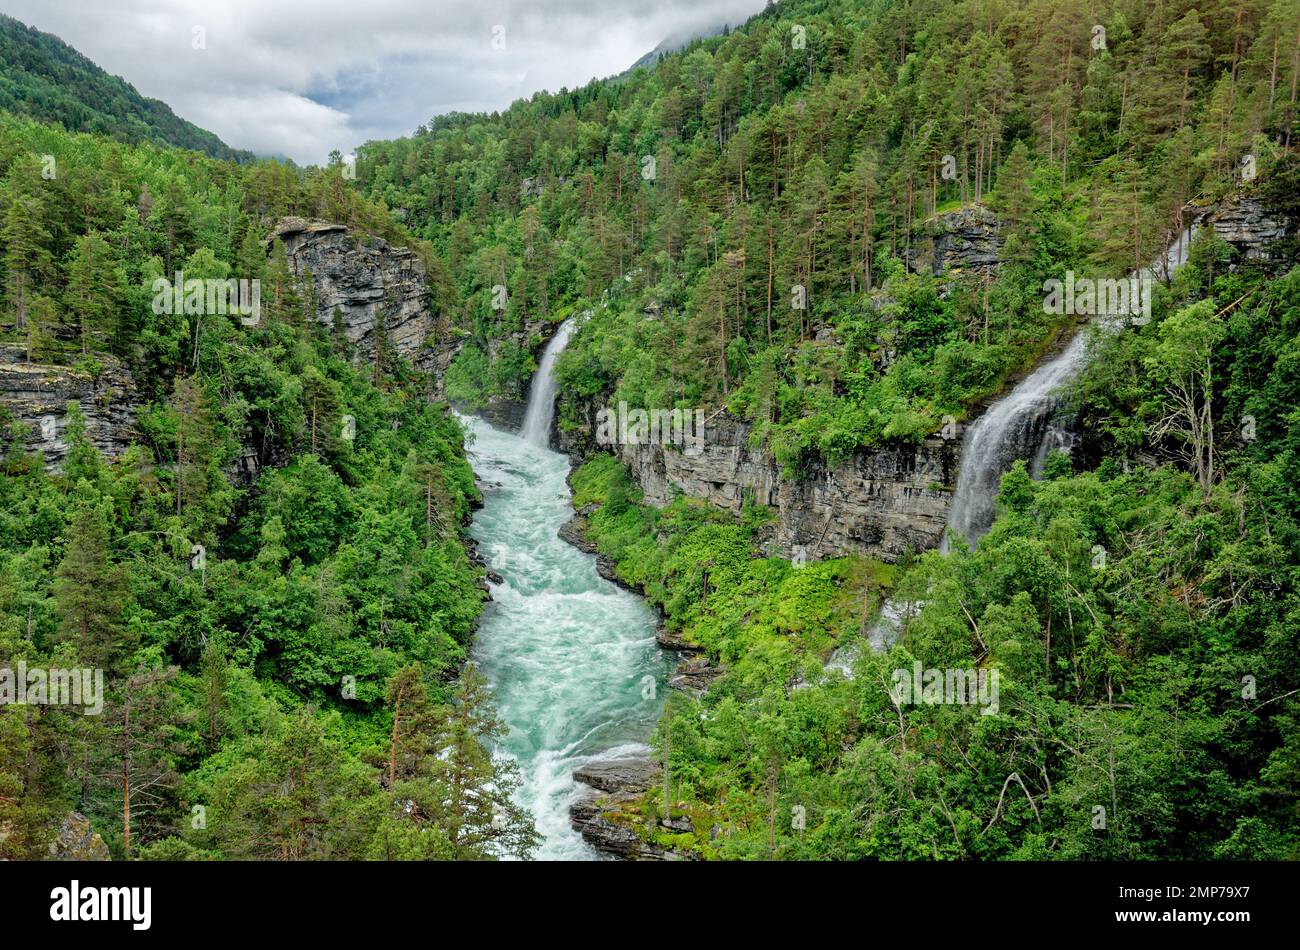 Travel destination Norway. Jostedalsbreen National Park - Waterfall - Europe travel destination Norway 12th of June 2012 Stock Photo